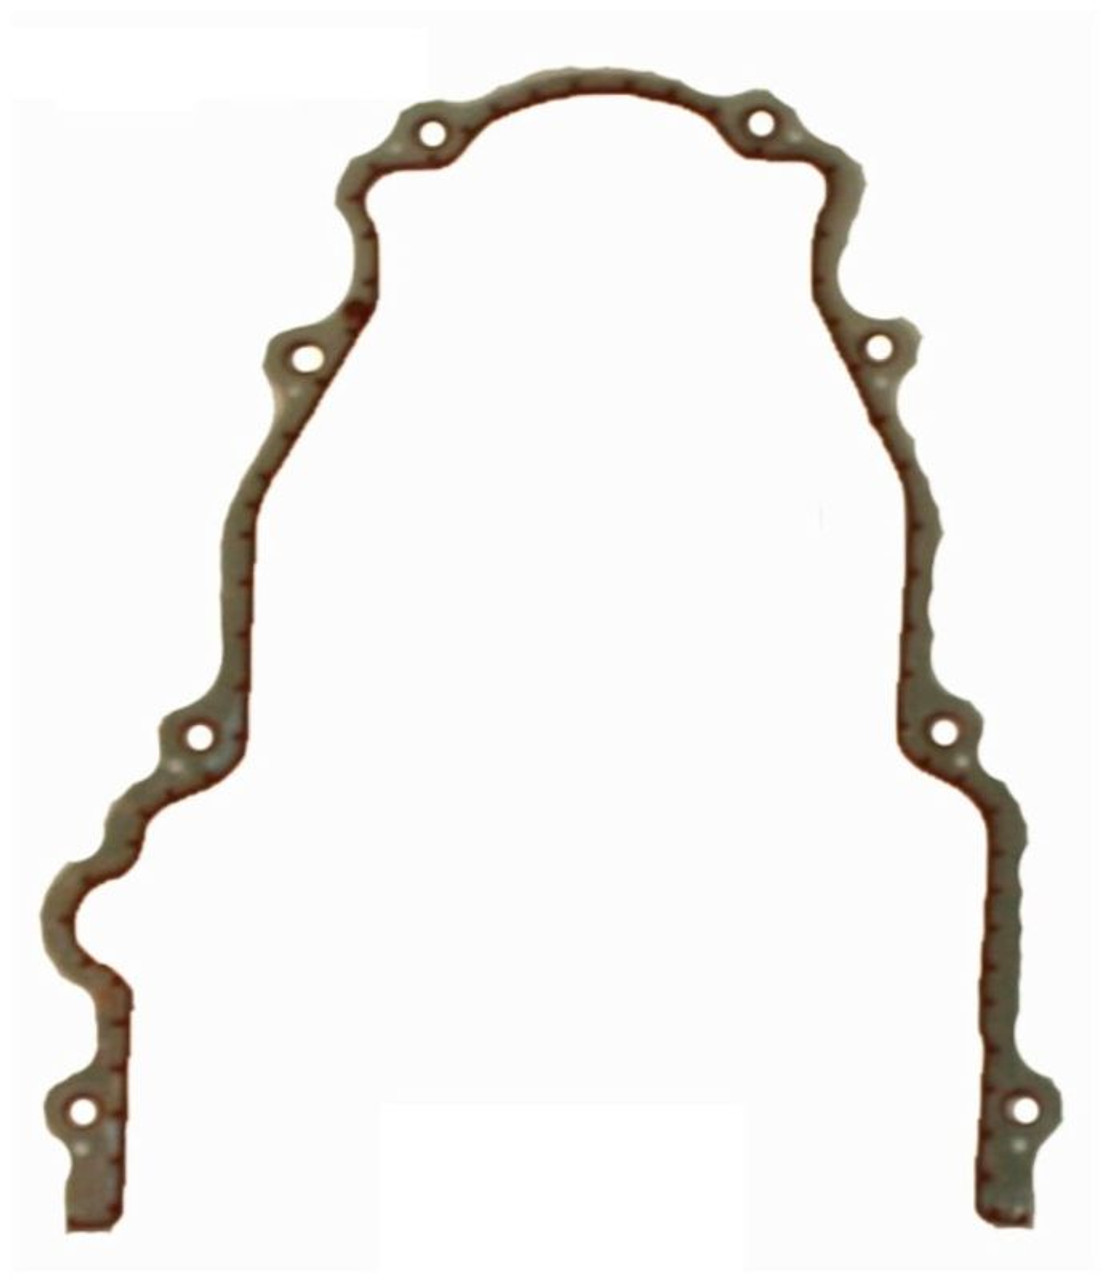 2005 Chevrolet Tahoe 4.8L Engine Timing Cover Gasket TCG293-A -274